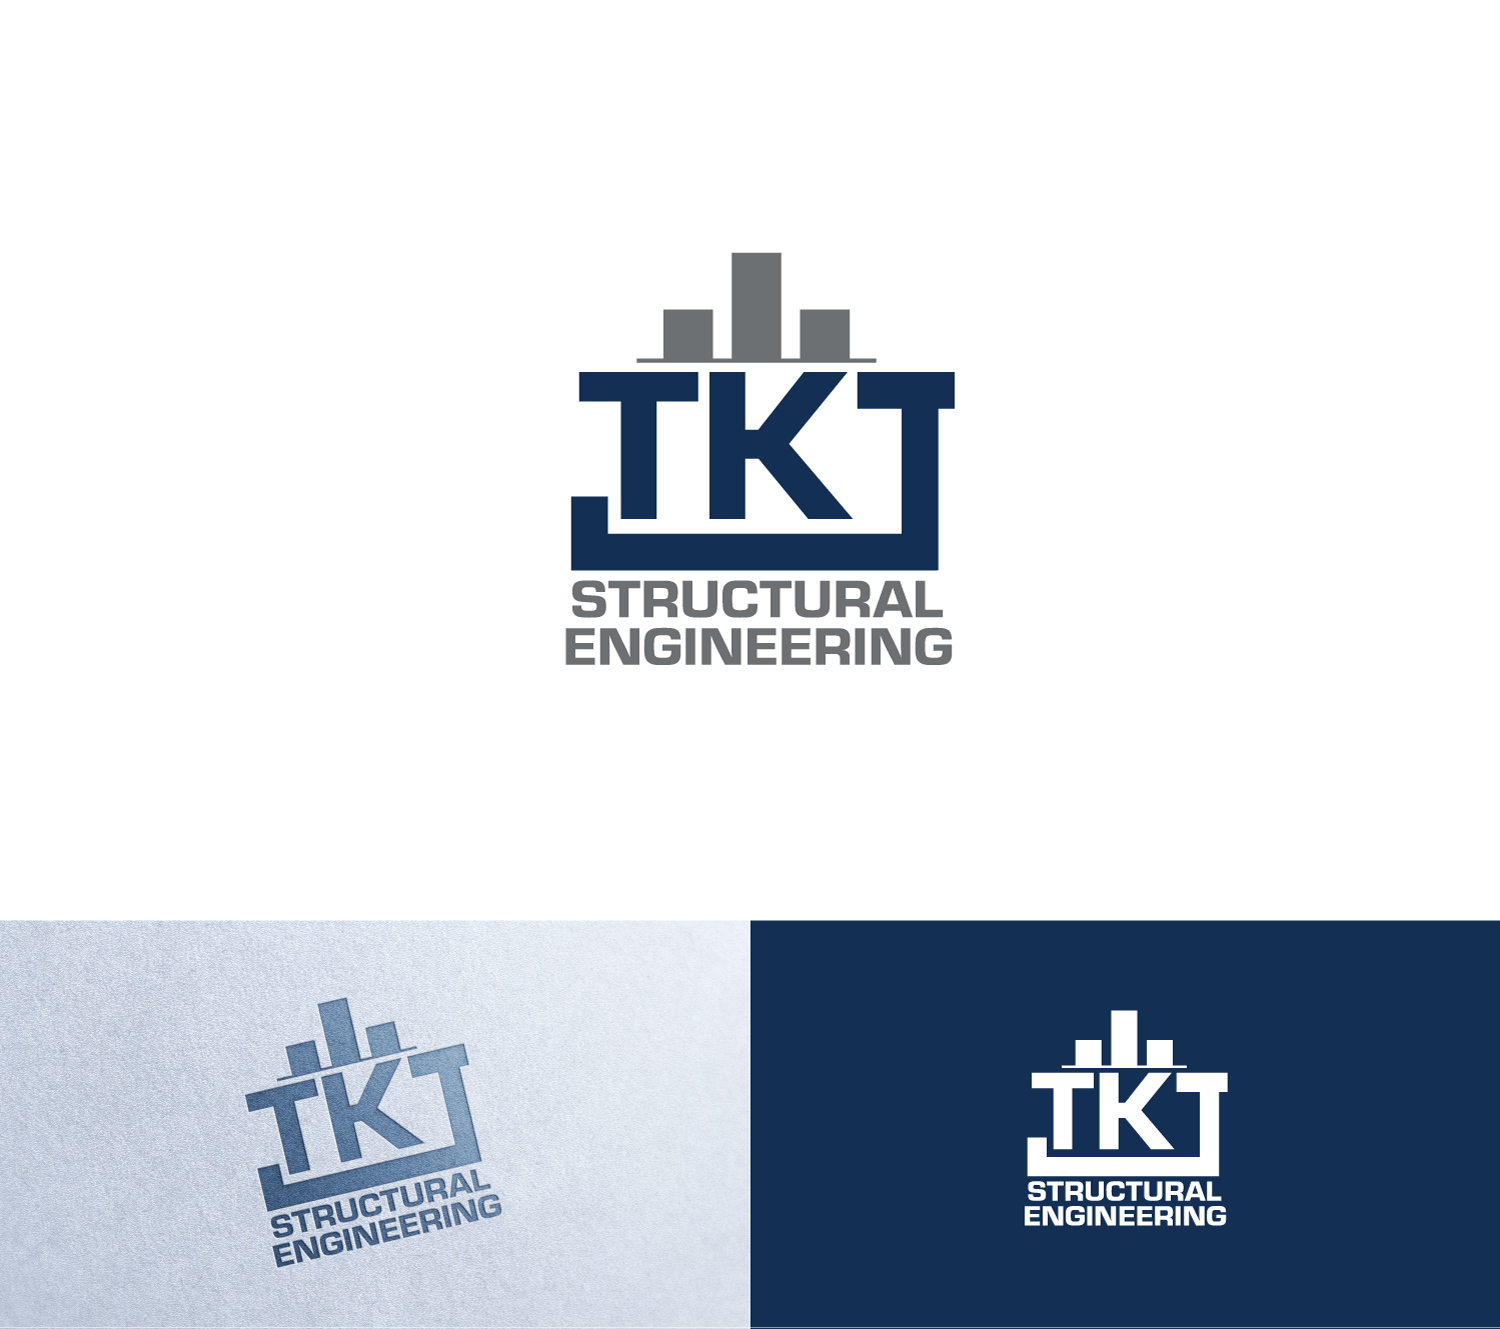 Structural Engineering Logo - Professional, Serious, Civil Engineer Logo Design for TKJ Structural ...